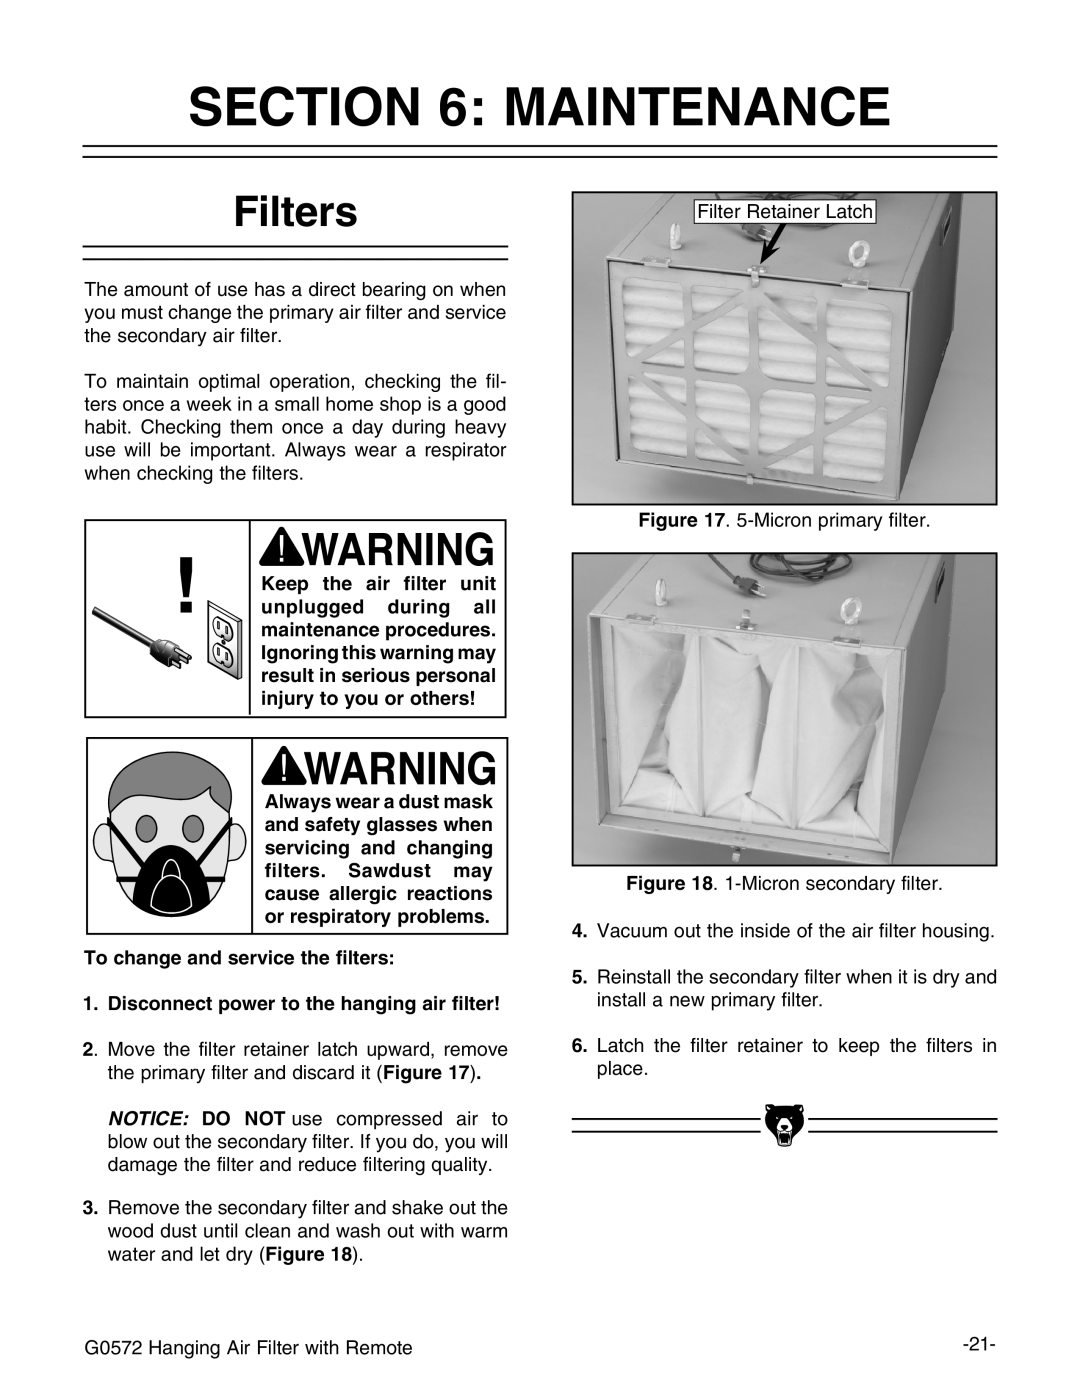 Grizzly G0572 instruction manual Maintenance, Filters, NOTICE: DO NOT use 